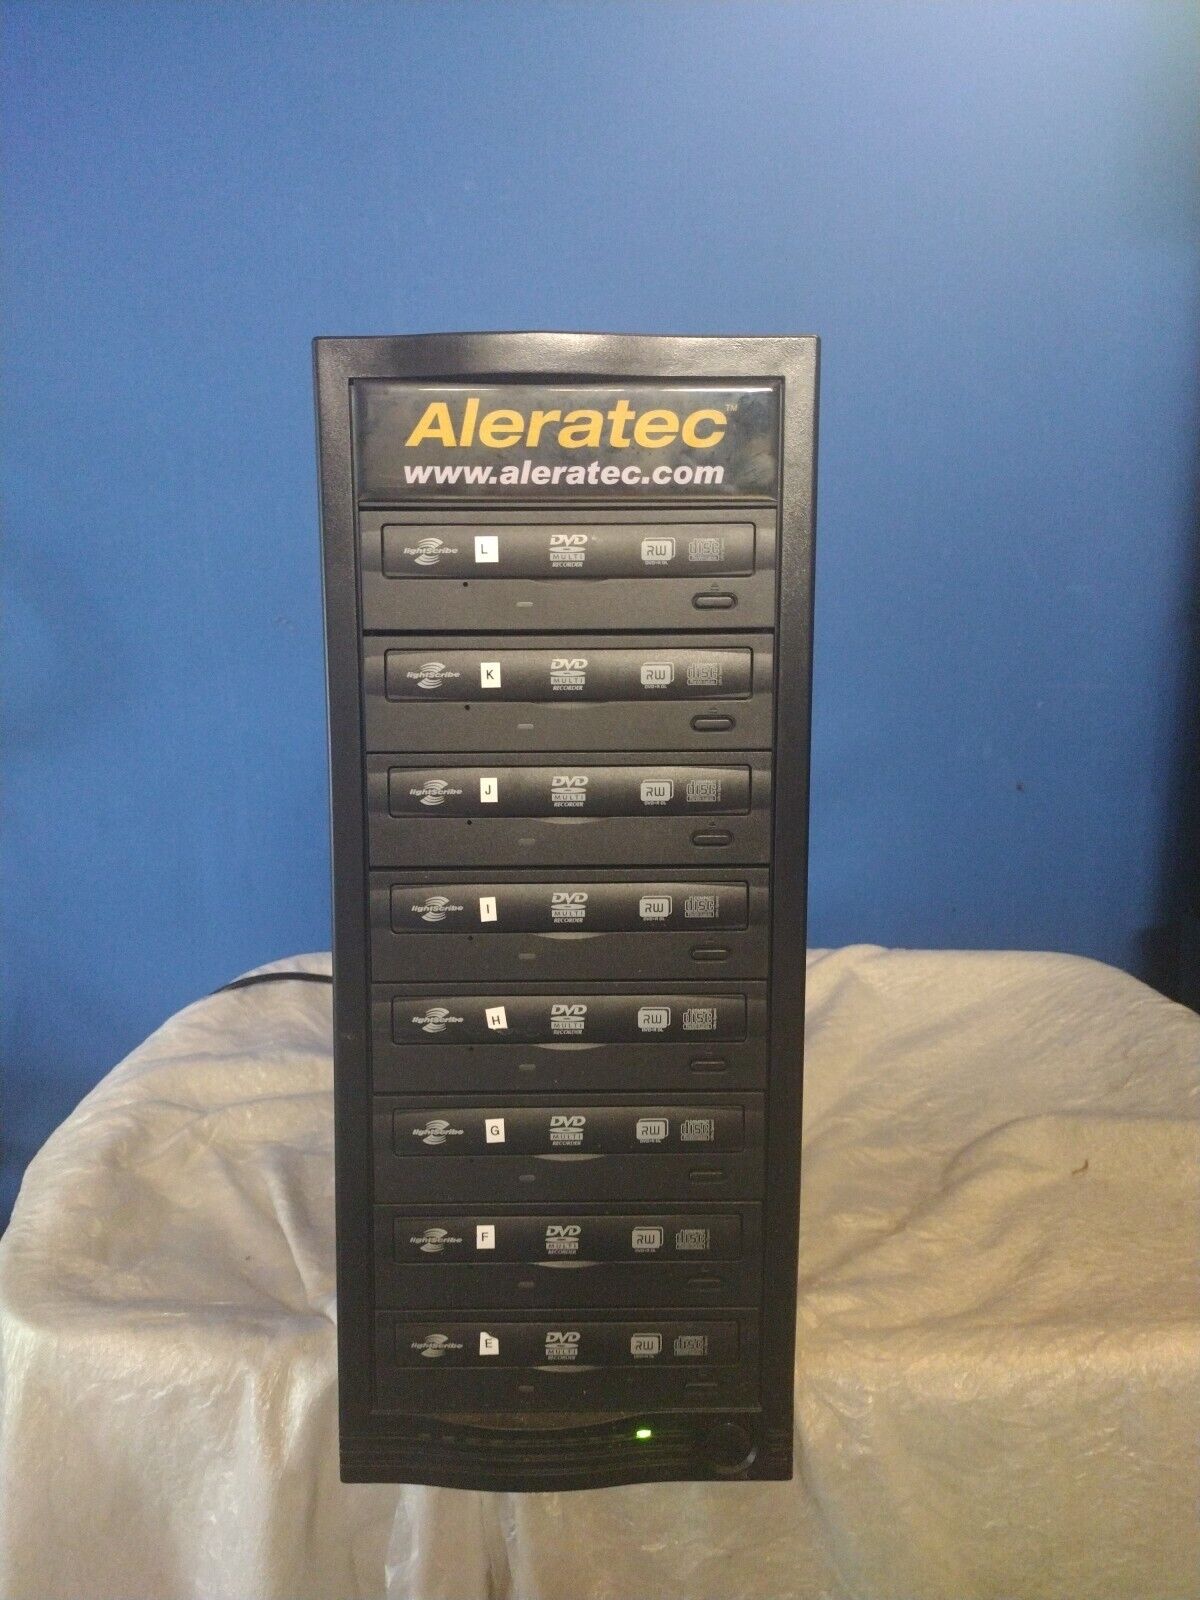  Aleratec 1:8 DVD/CD Tower Publisher HLX eSATA Duplicator Untested Does Power Up